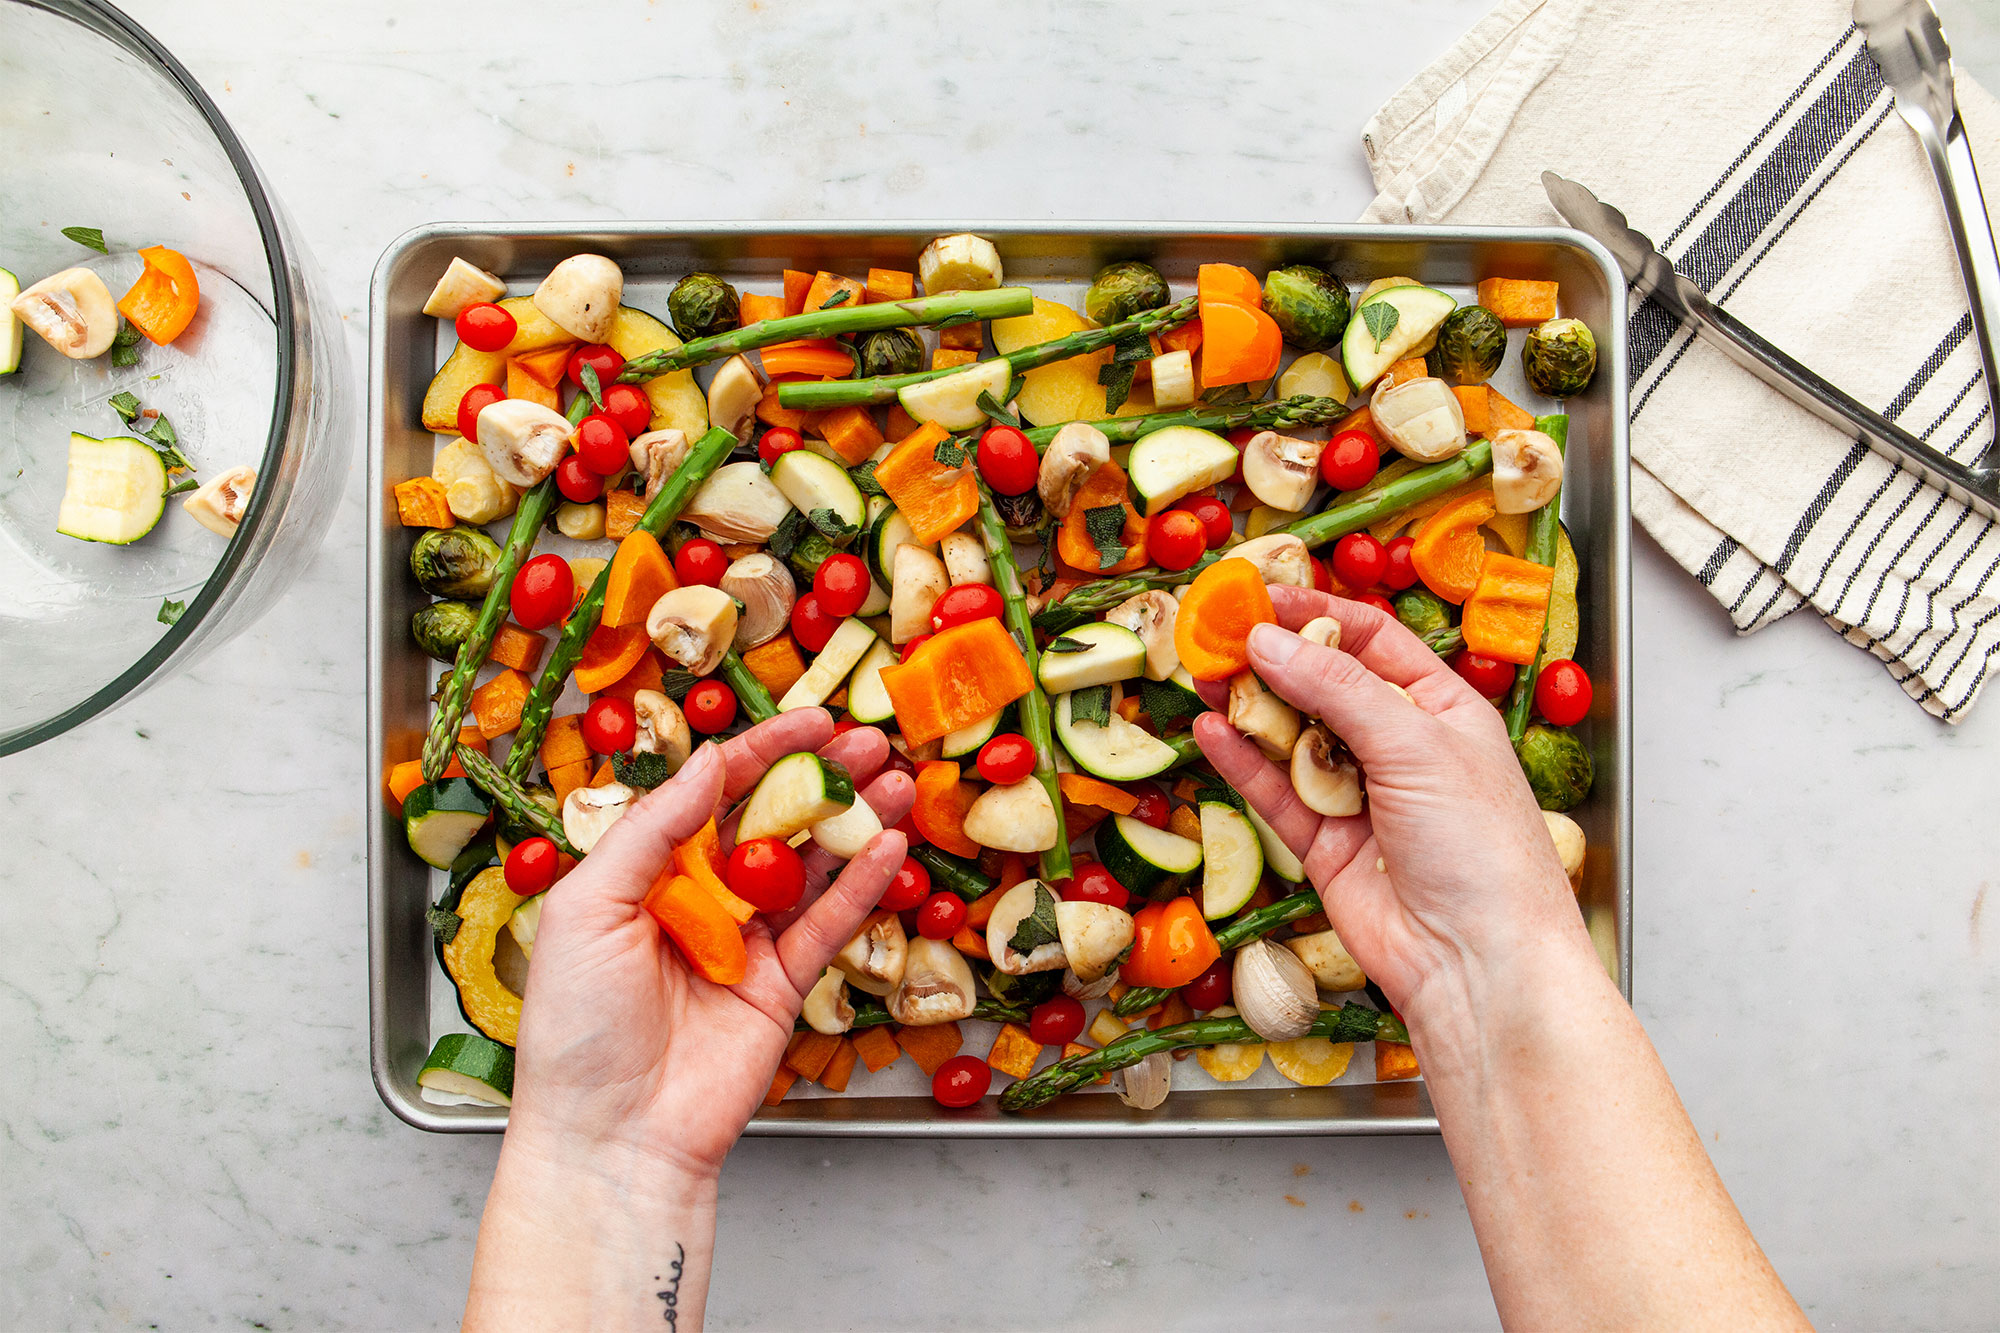 Adding the vegetables to the sheet pan for roasting.